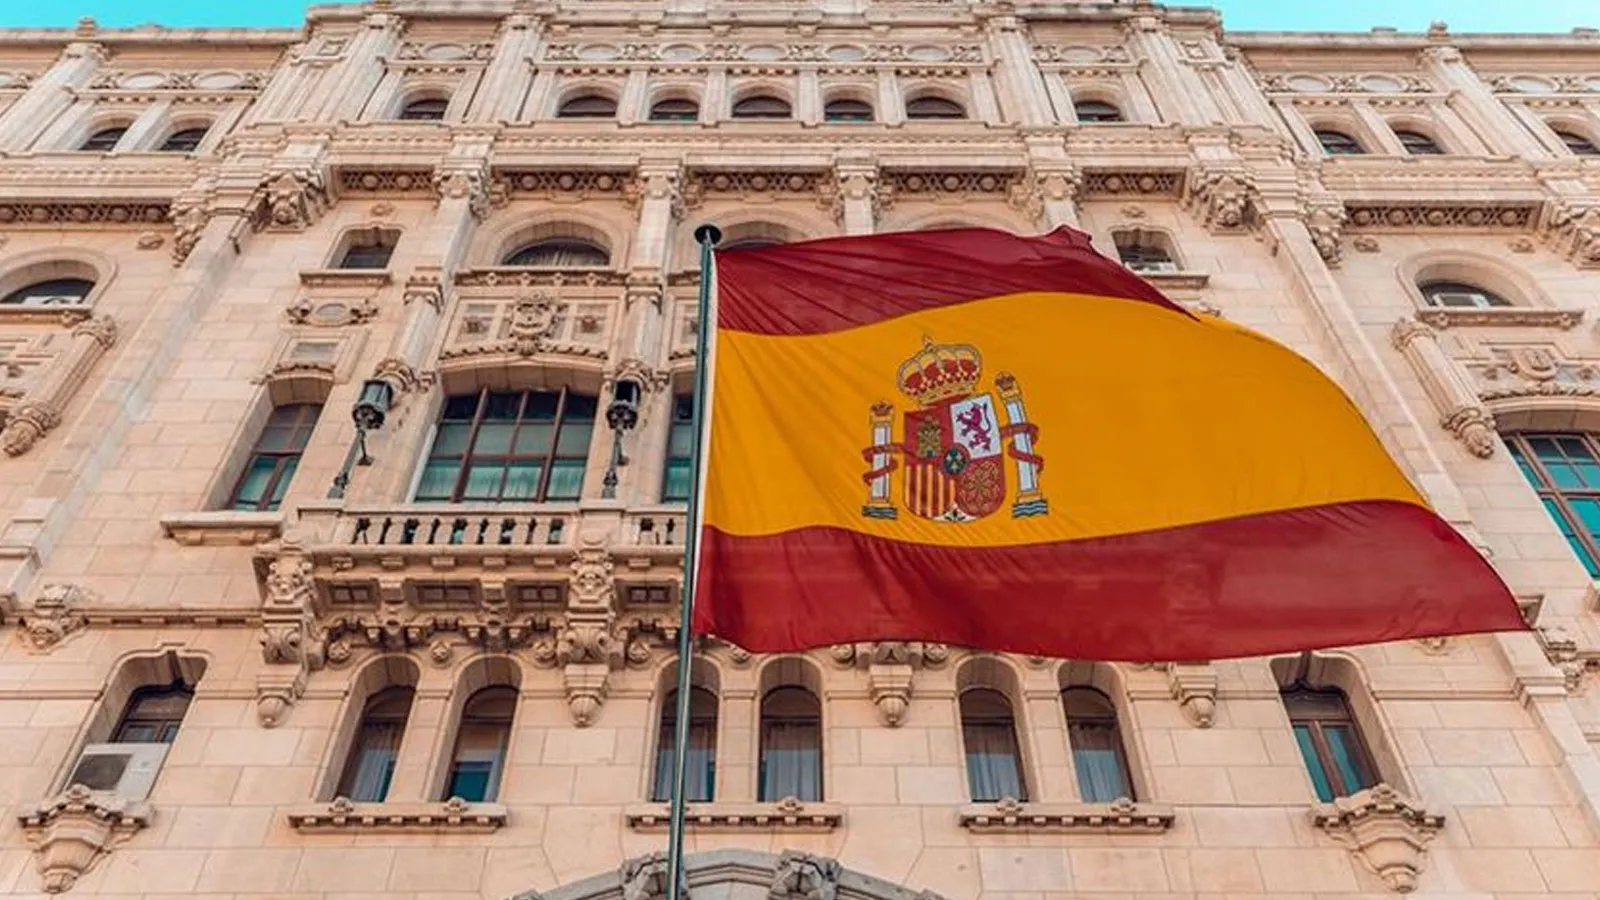 Spain is getting into the artificial intelligence business!